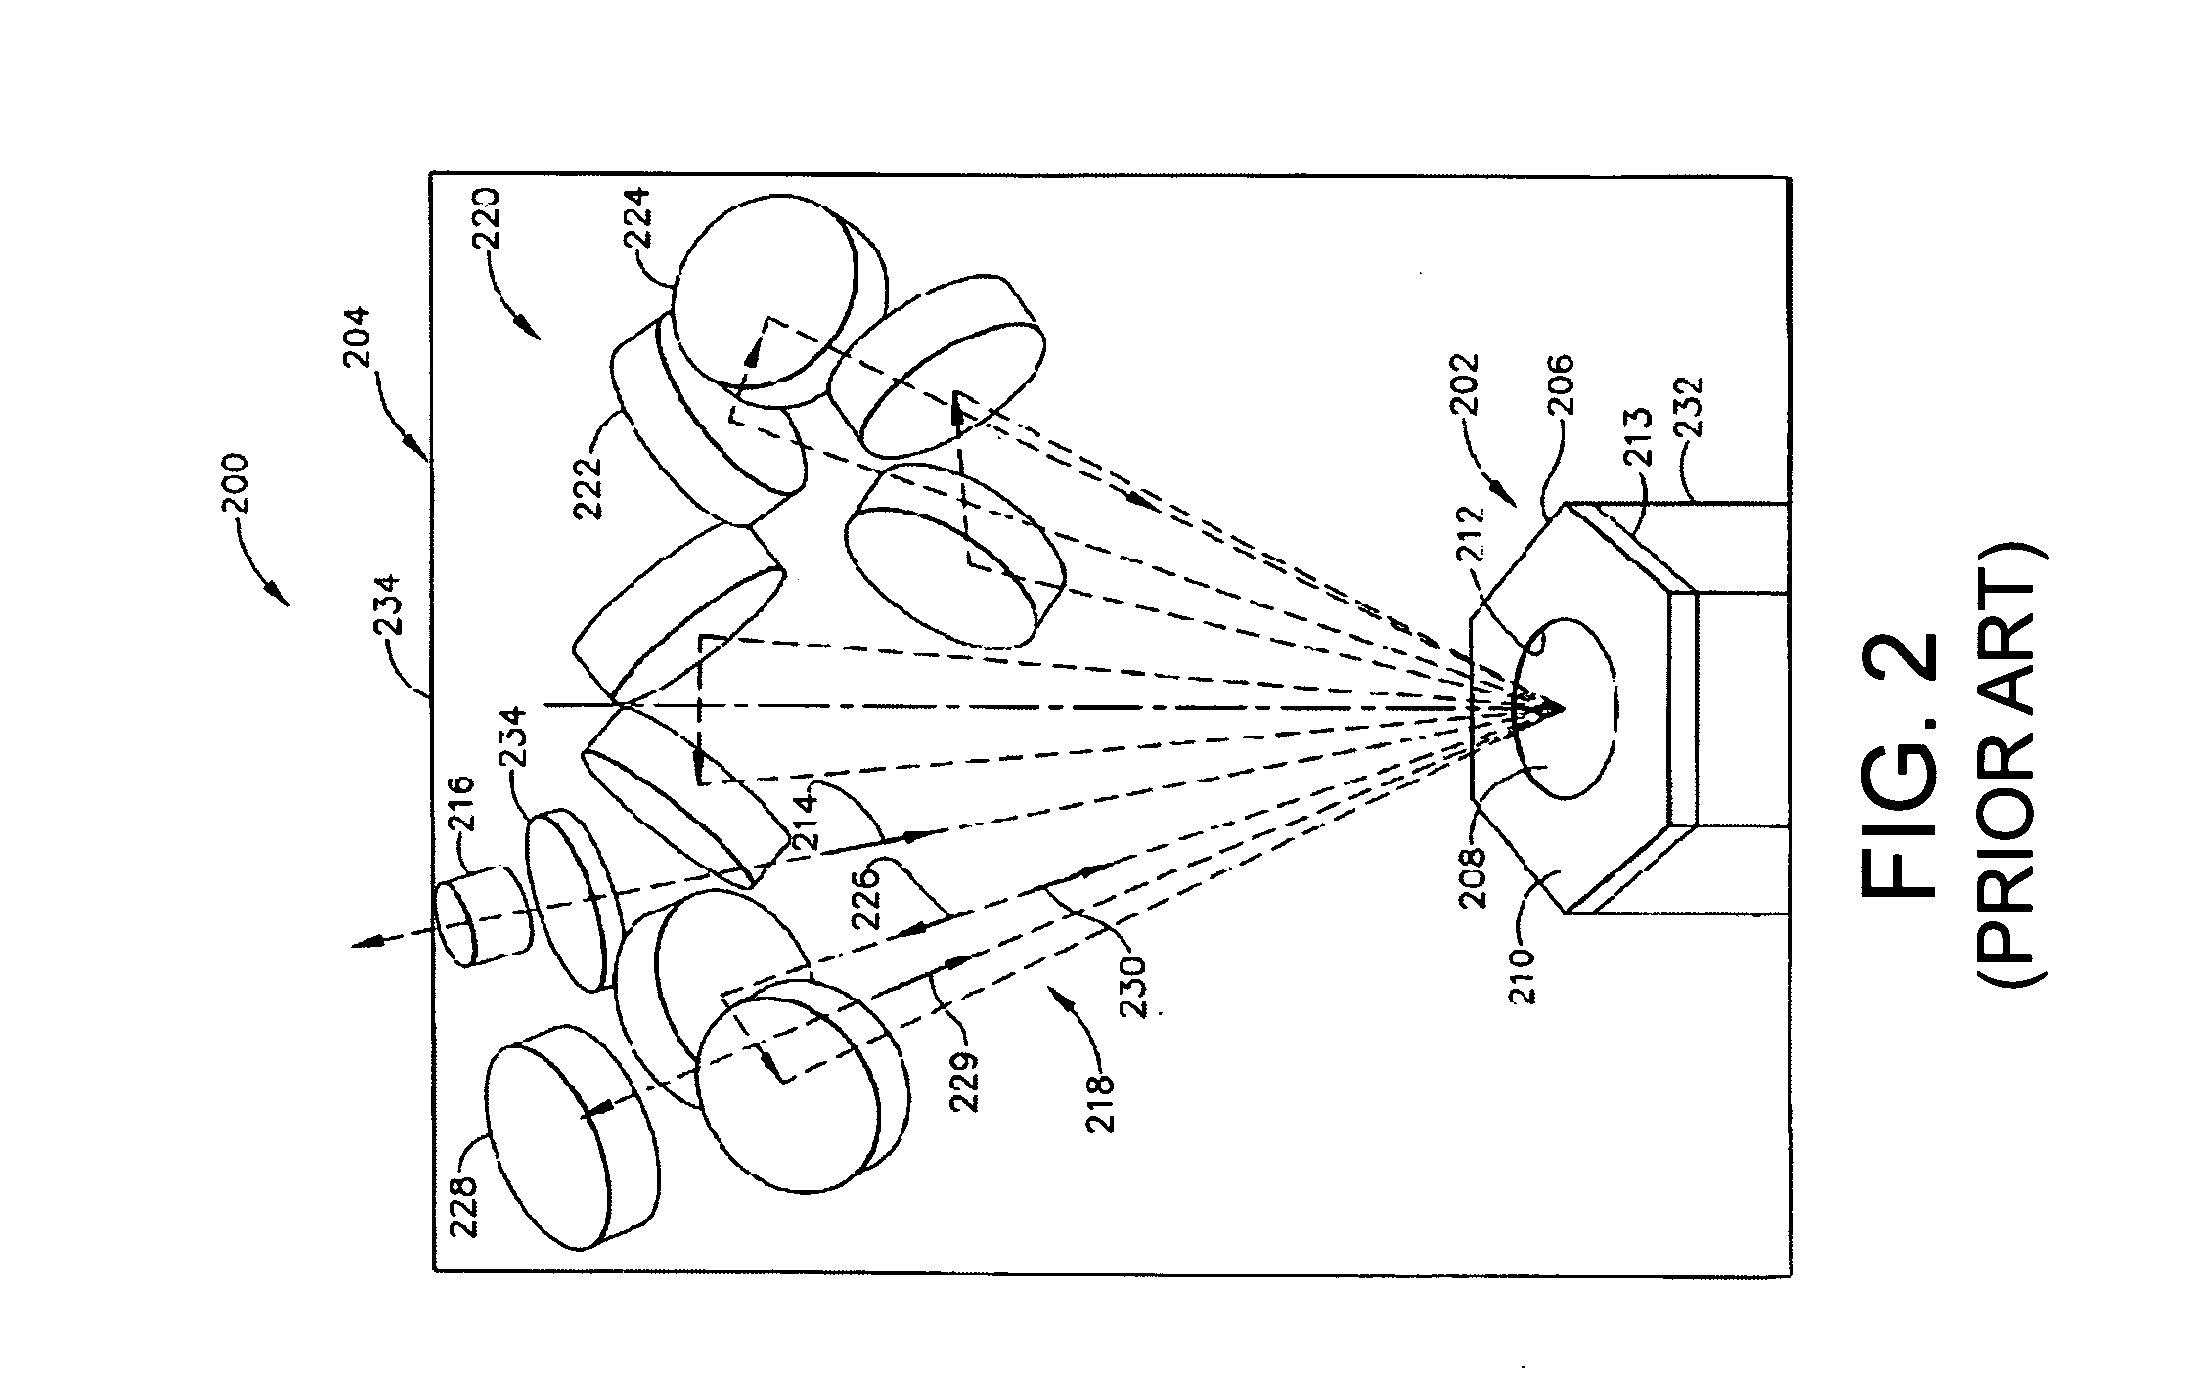 Solid-state laser with multi-pass beam delivery optics